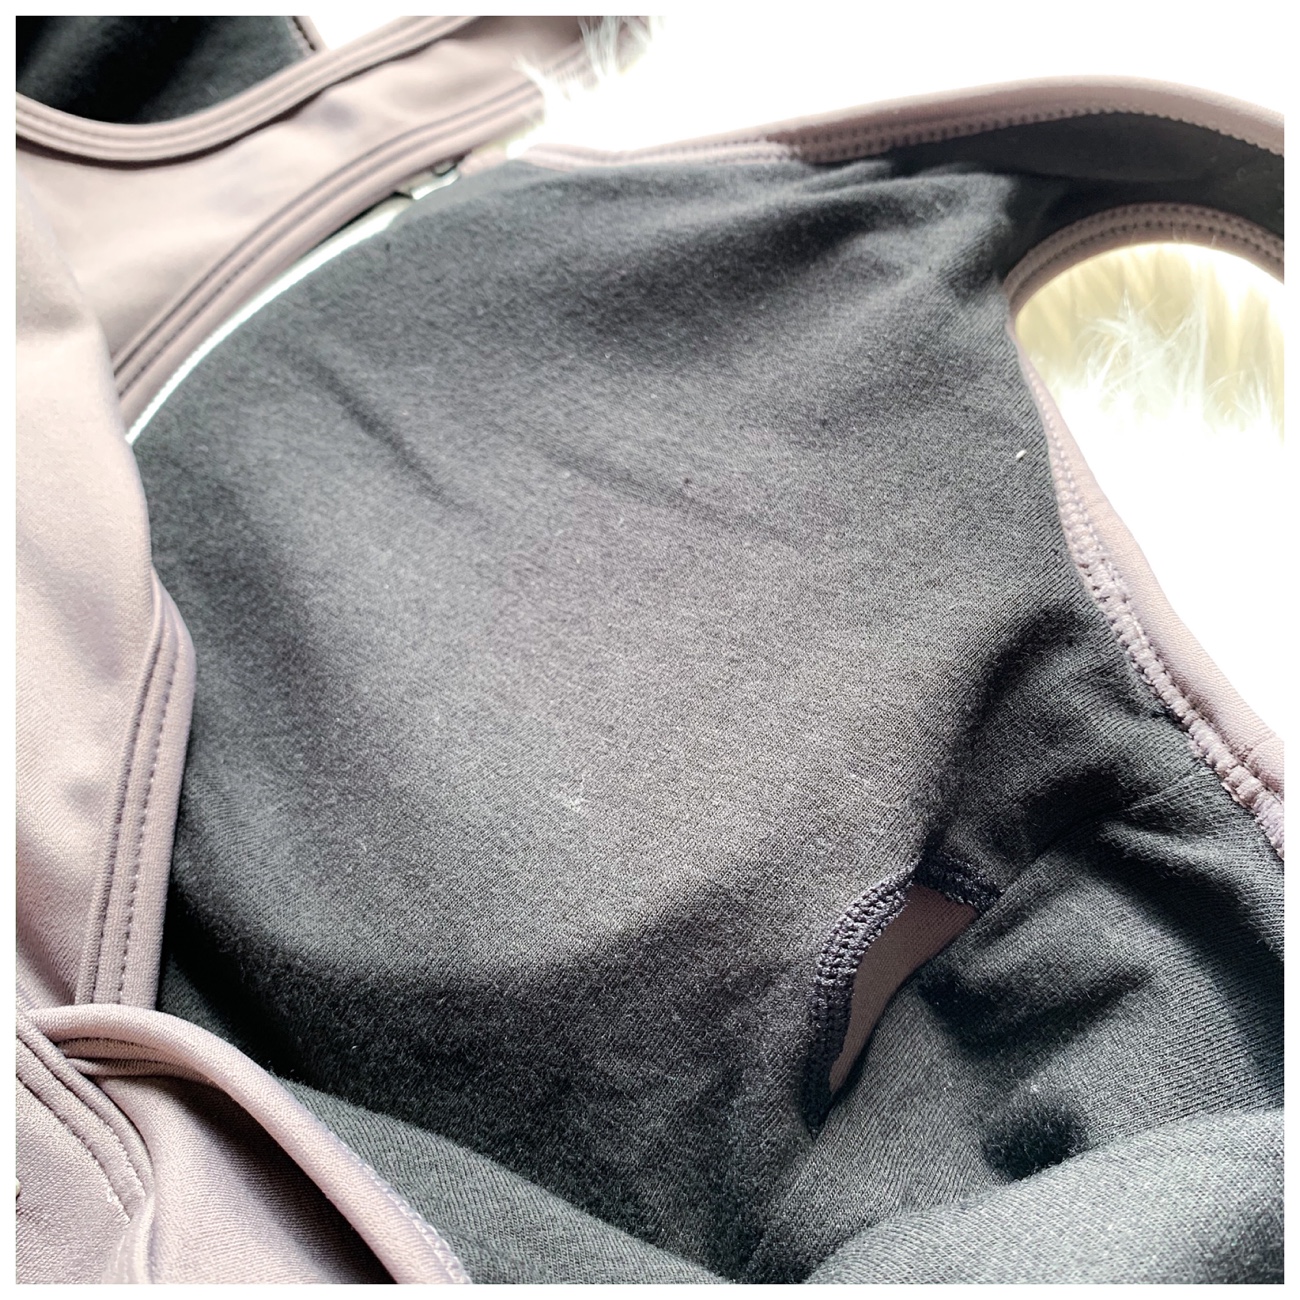 Aimn Activewear - Boost Hoodie, Zip Bra and Ribbed 7/8 tights